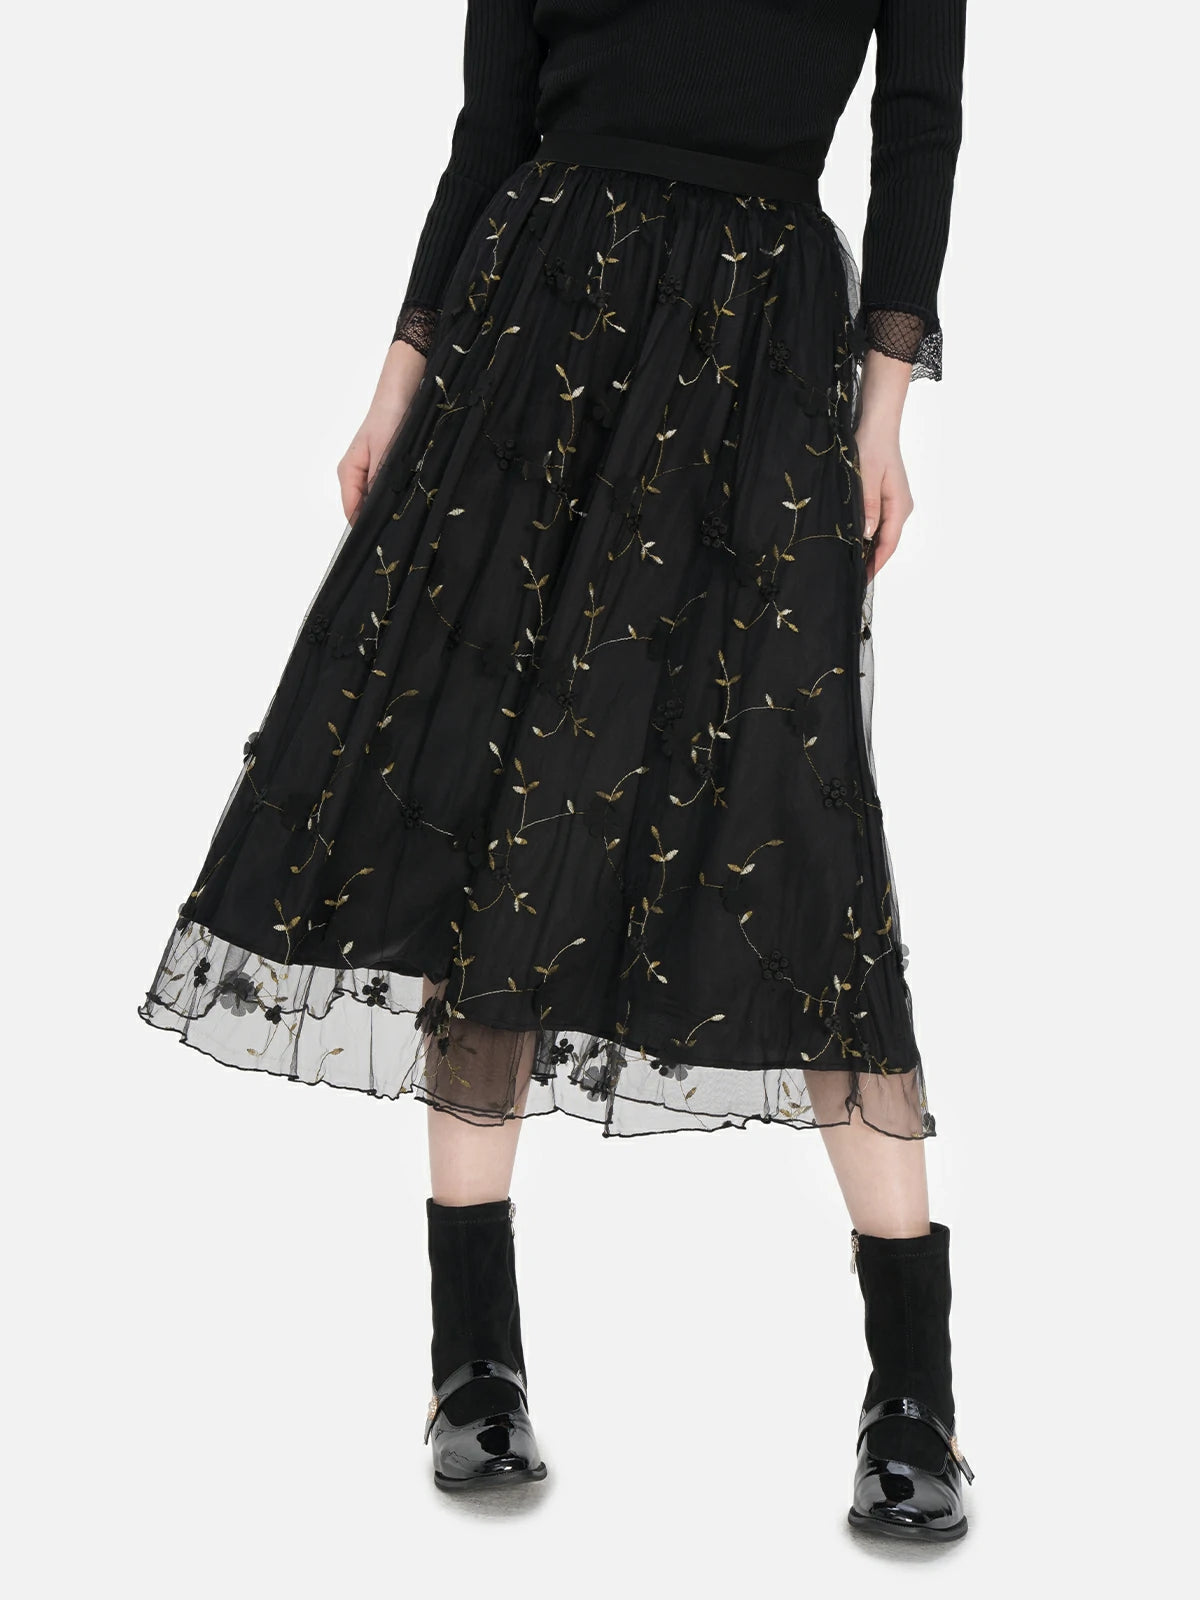 Unique midi tulle skirt with high waist and embroidered leaf patterns, perfect for creating an elegant and romantic ensemble.